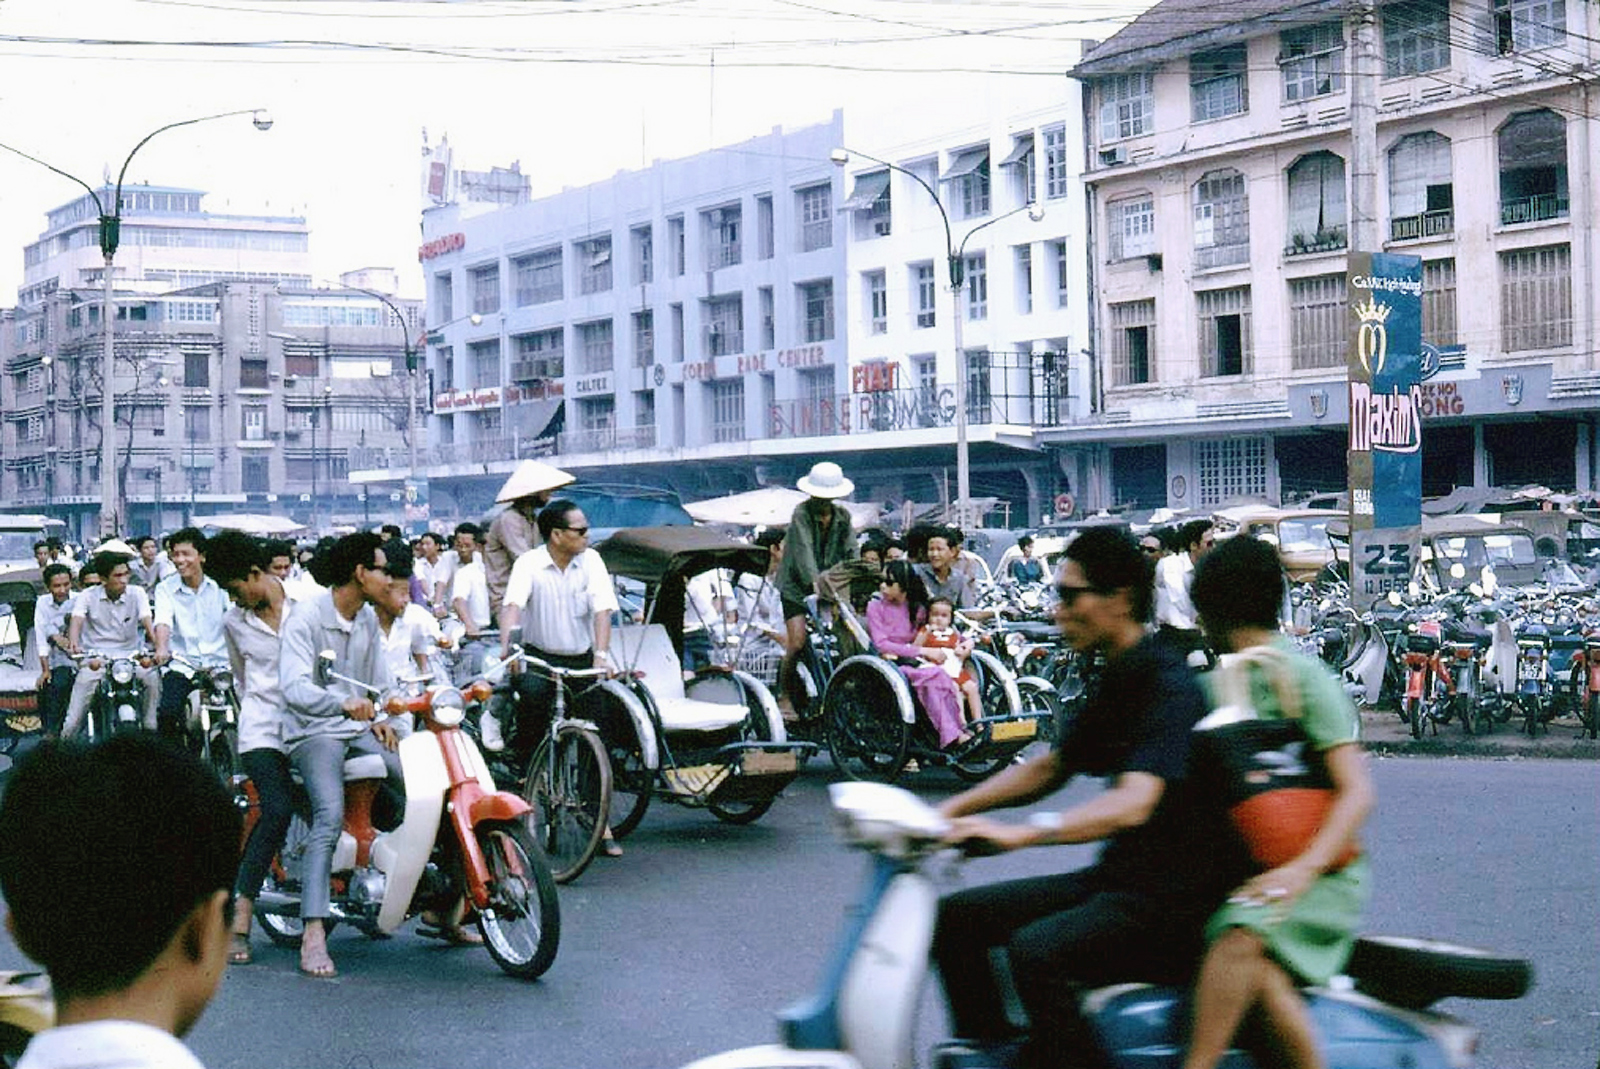 several people riding motor bikes on a crowded street